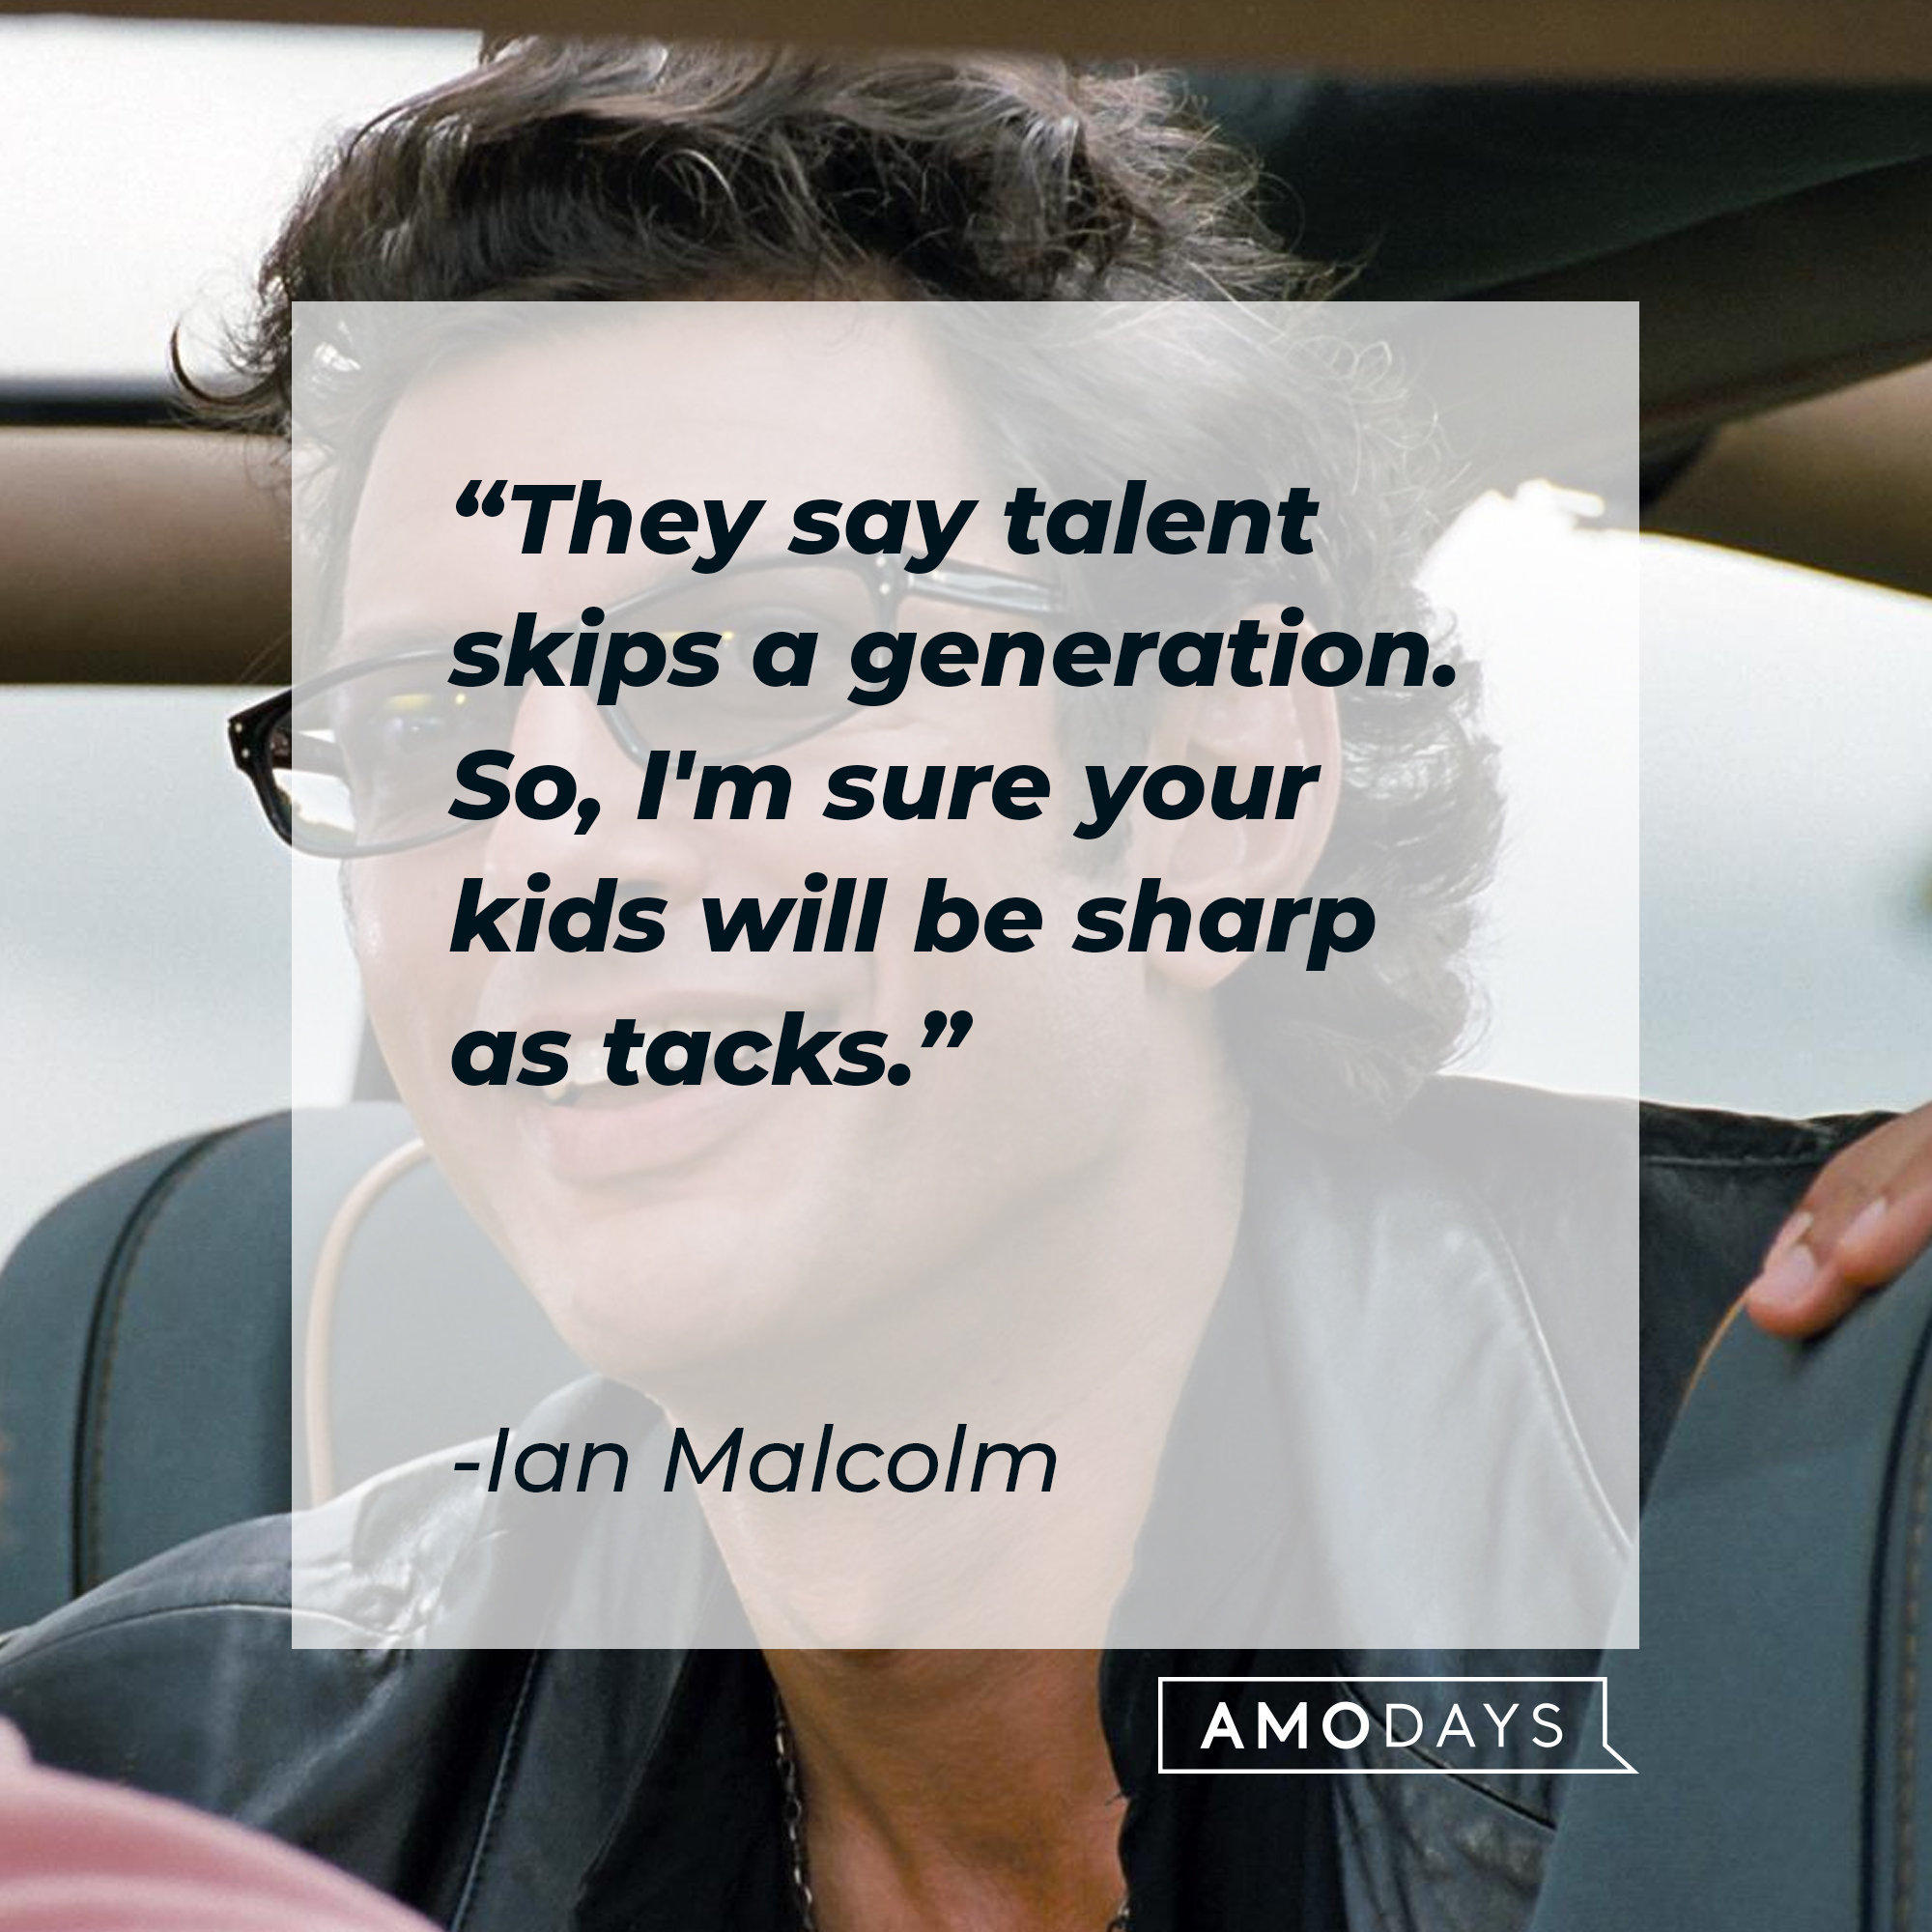 An image of Ian Malcolm with his quote: “They say talent skips a generation. So, I'm sure your kids will be sharp as tacks.” | Source: Facebook.com/JurassicWorld